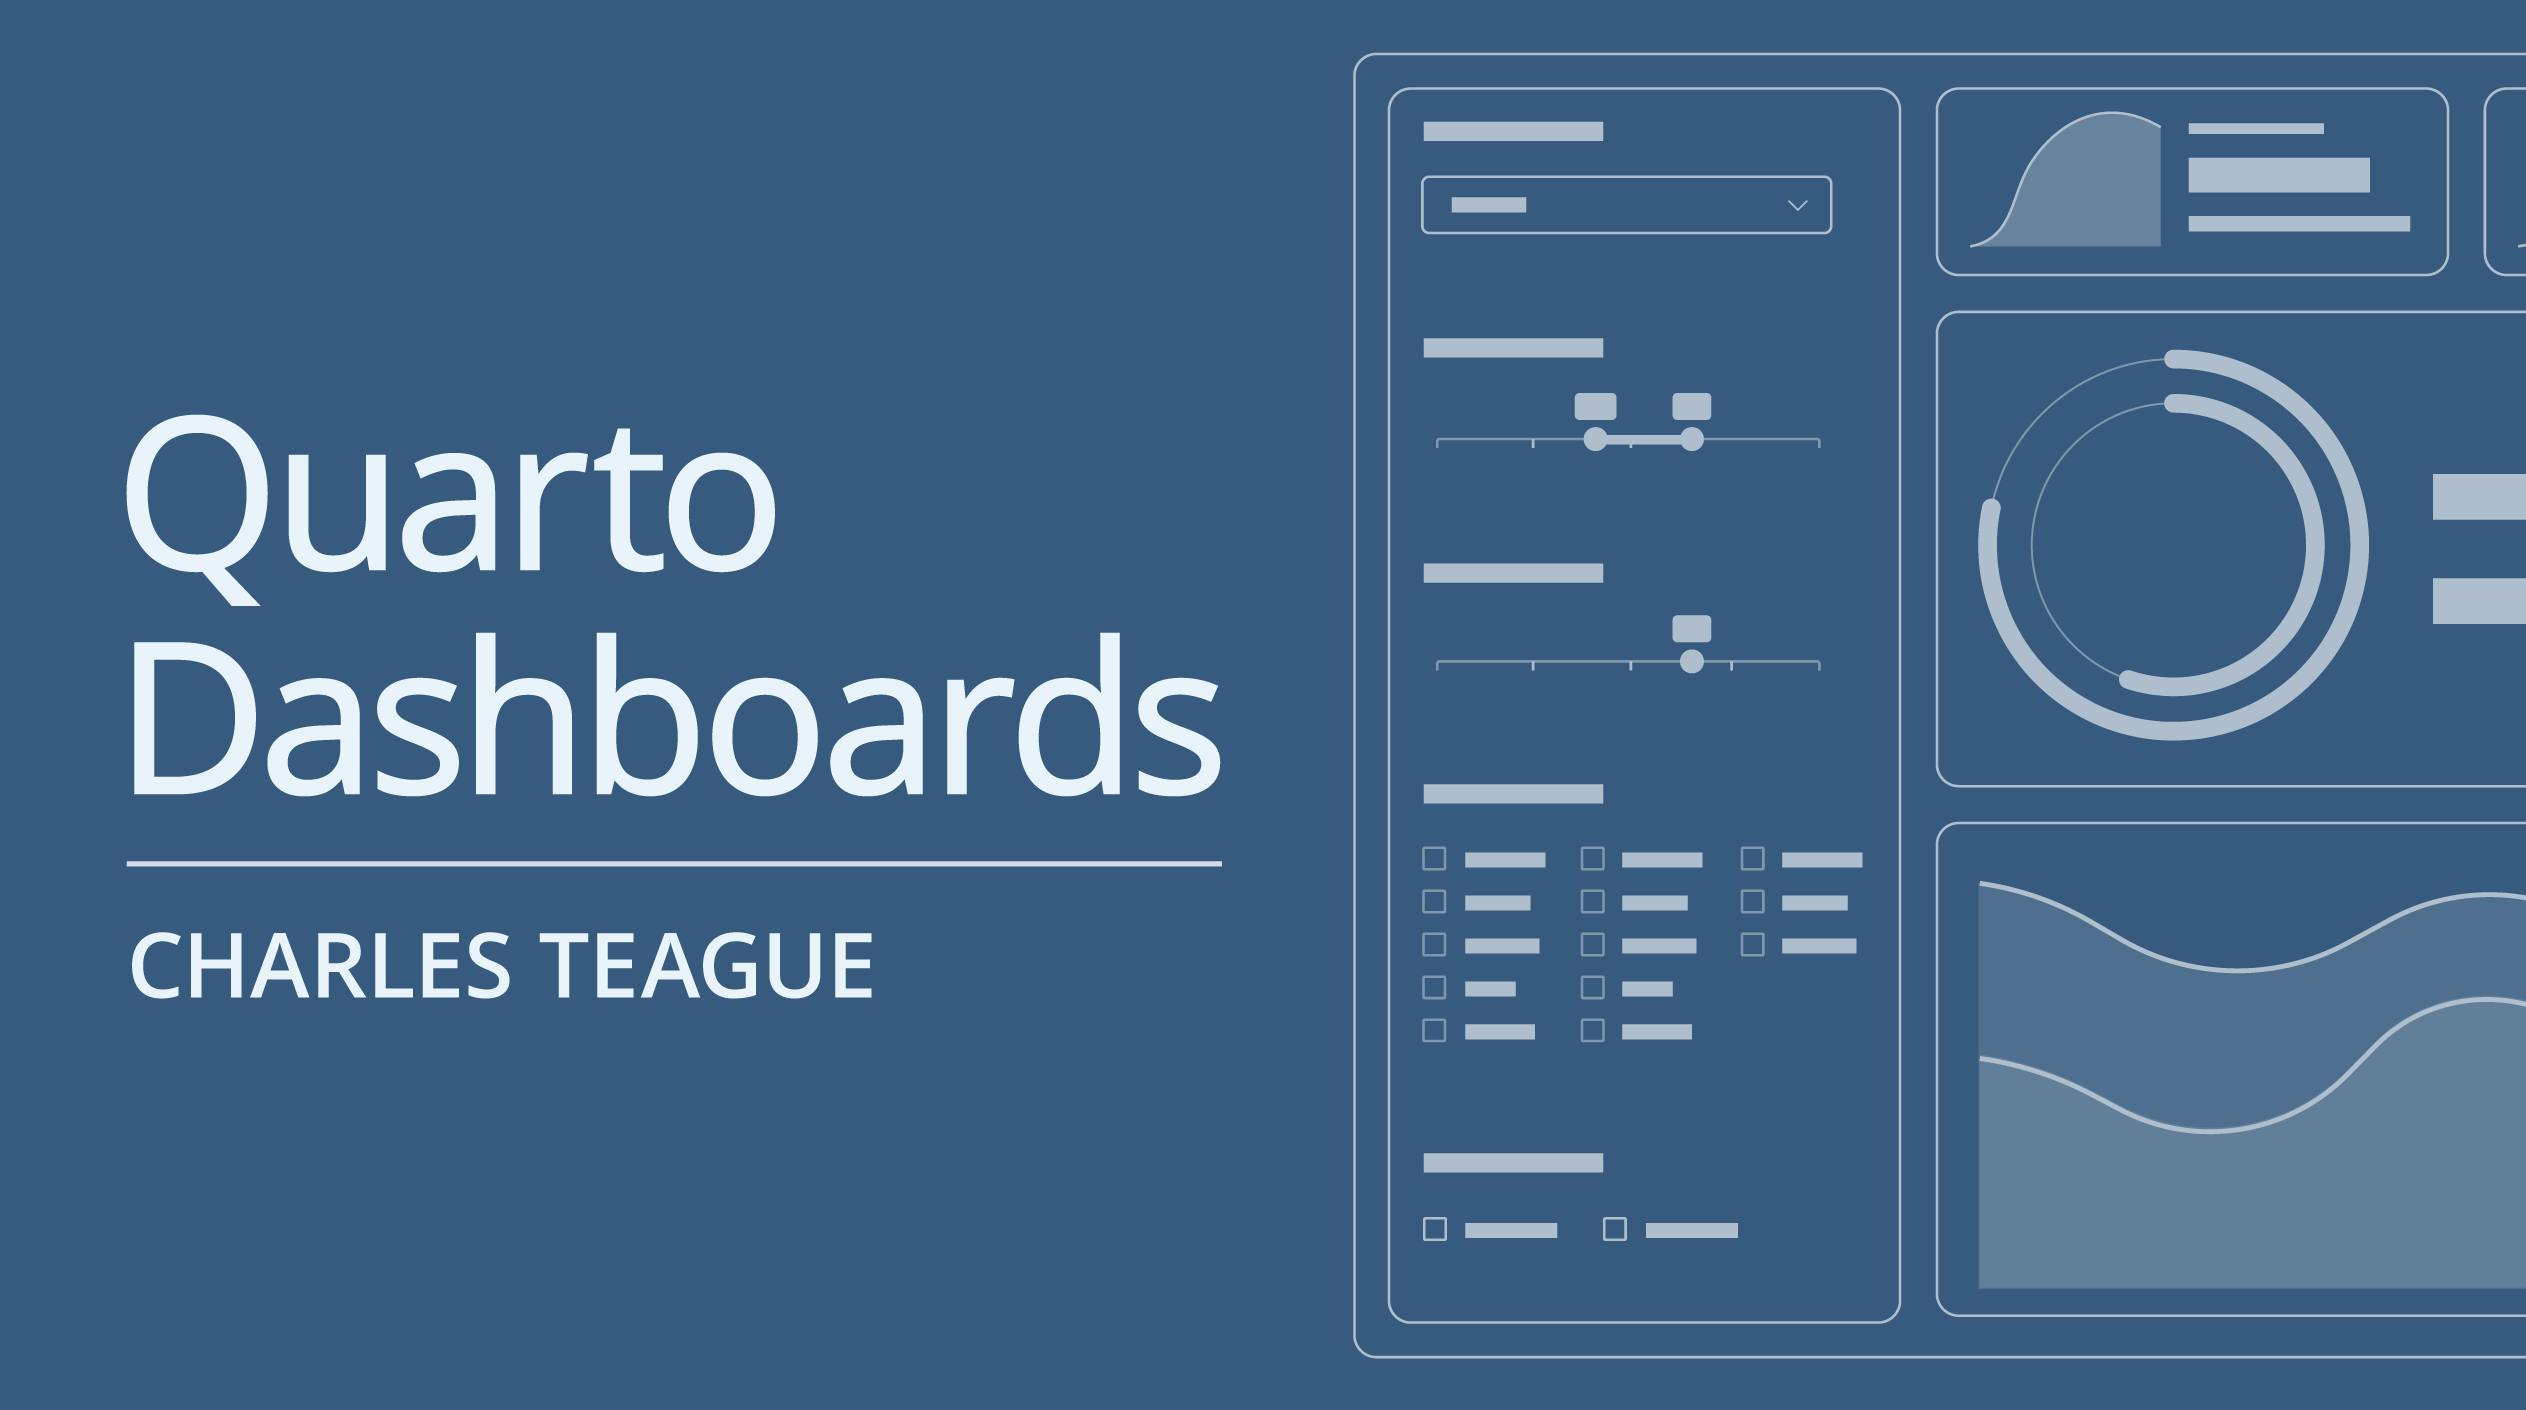 Quarto logo on a blue background with the title Quarto Dashboards, Charles Teague and an abstract dashboard sketch